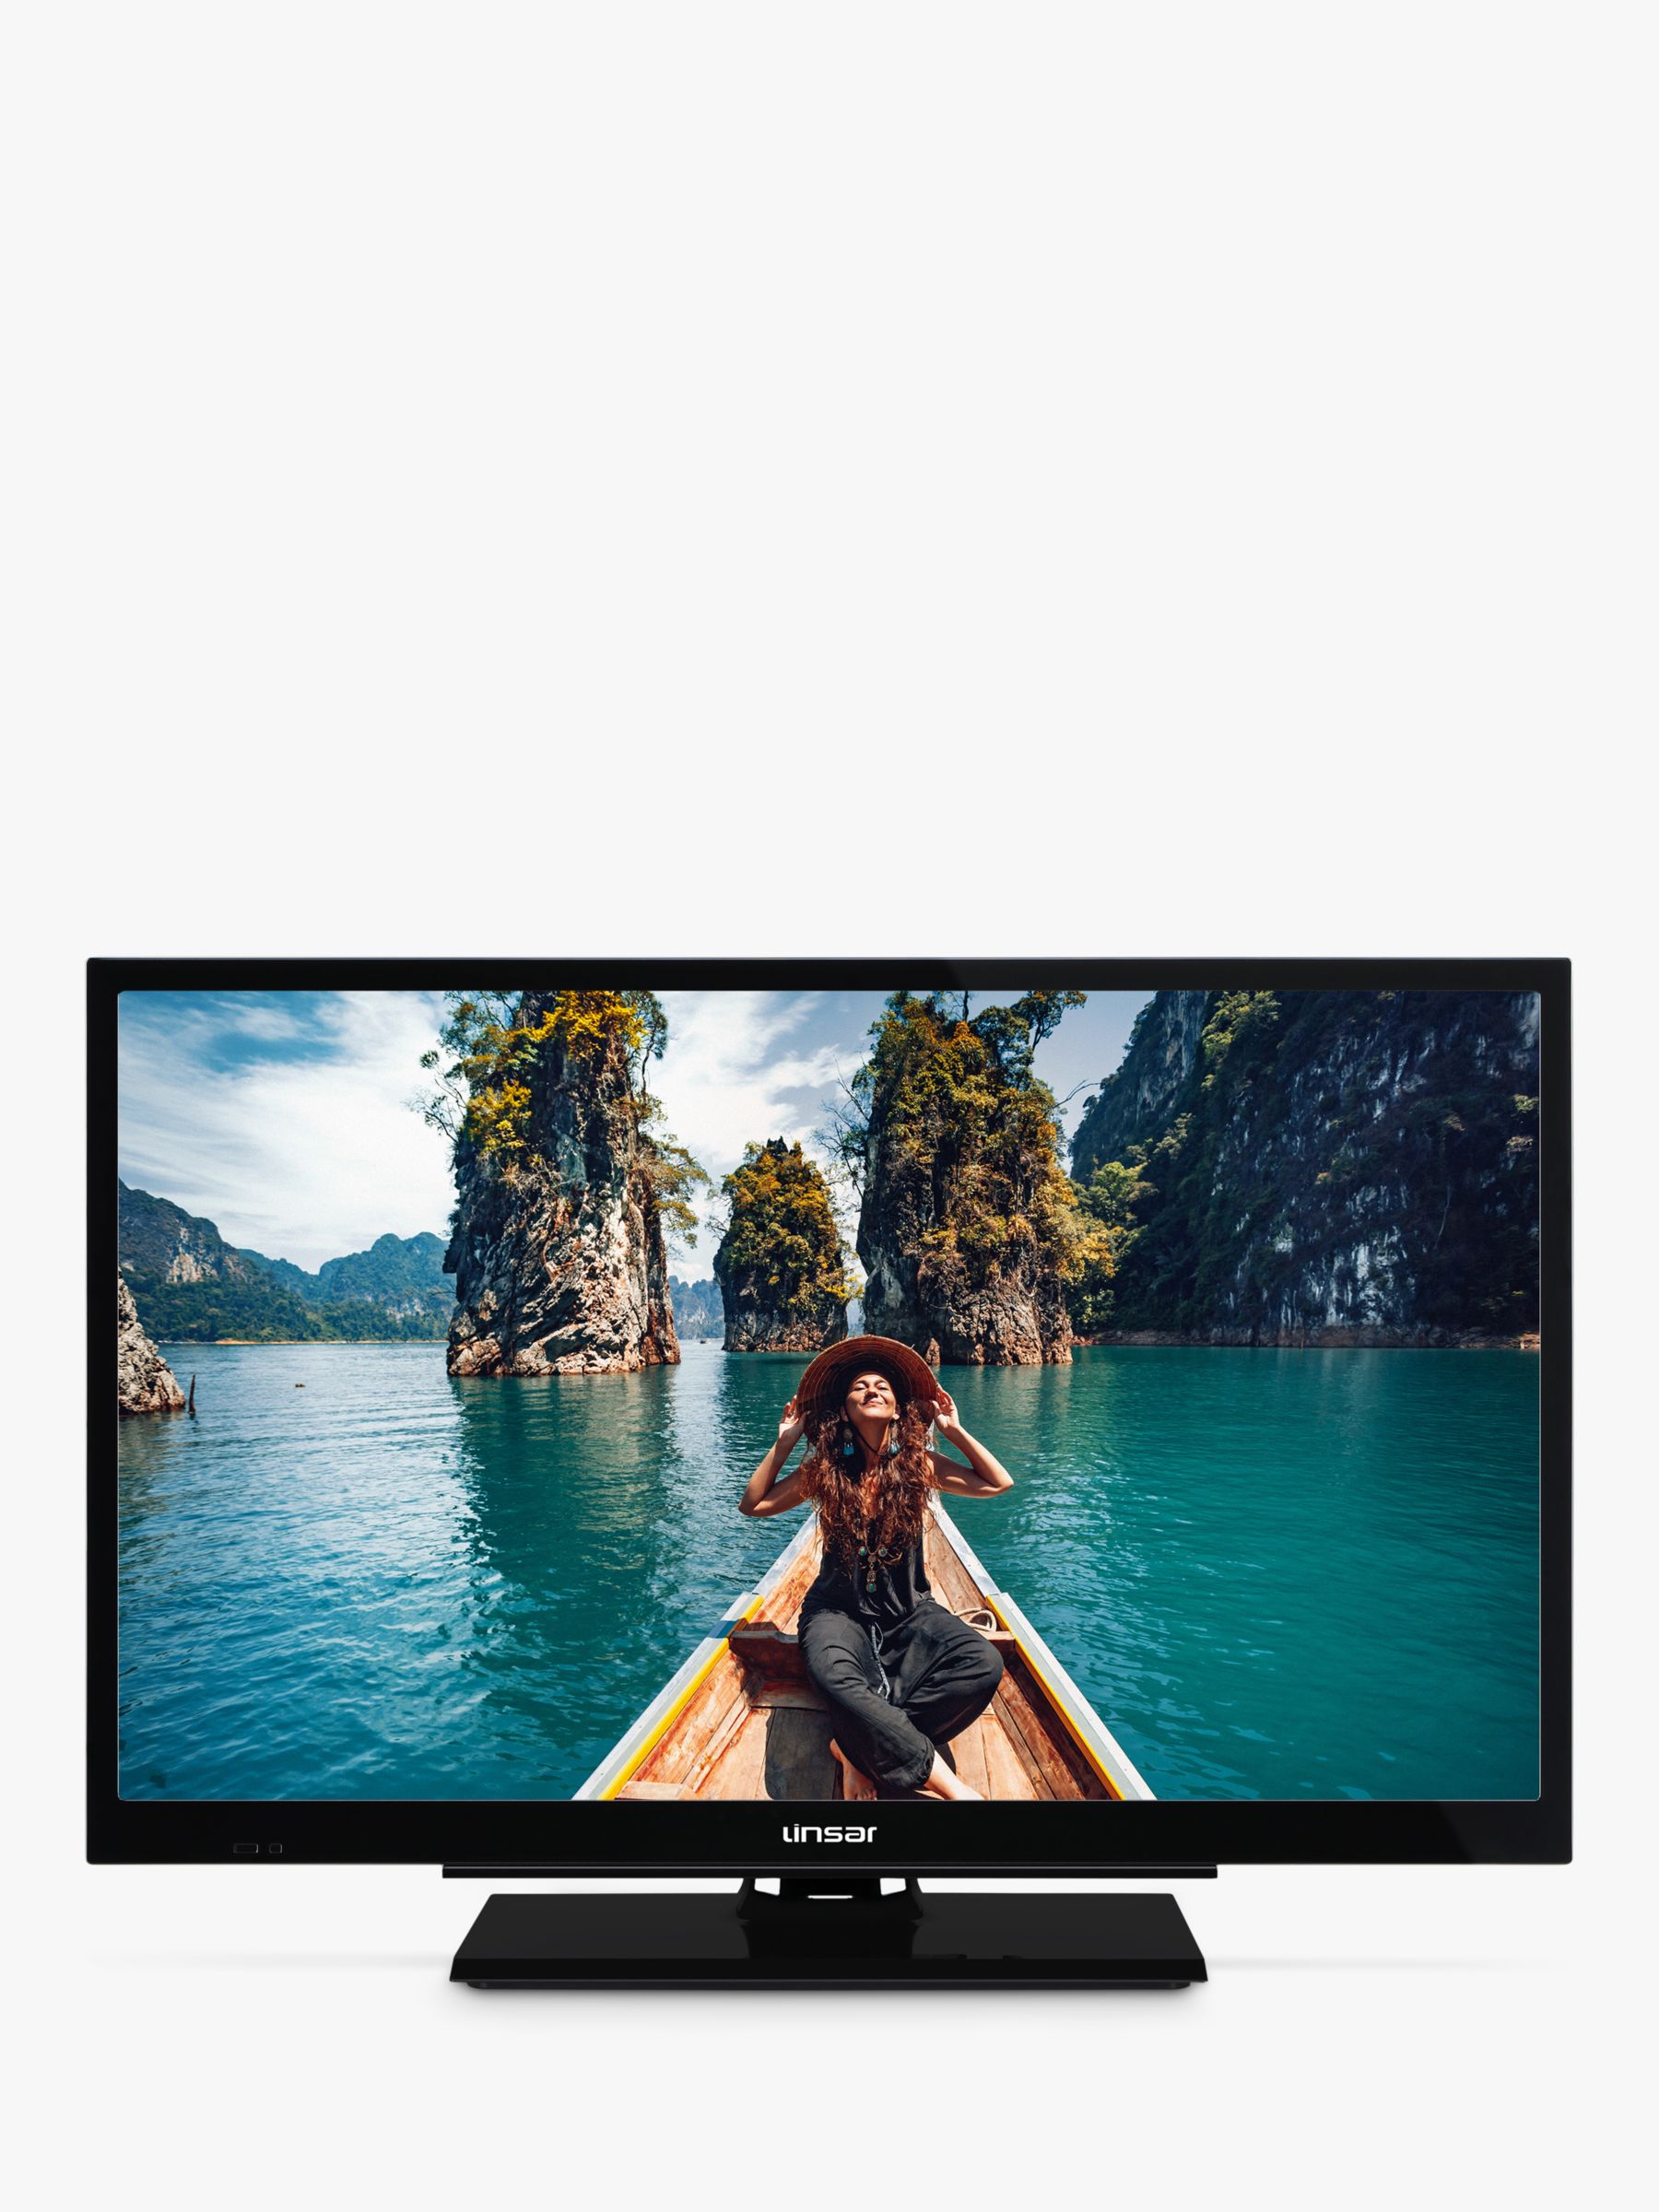 Linsar 24led1900 2020 Led Hd Ready 720p Smart Tv 24 Inch With Built In Wi Fi Freeview Play Black